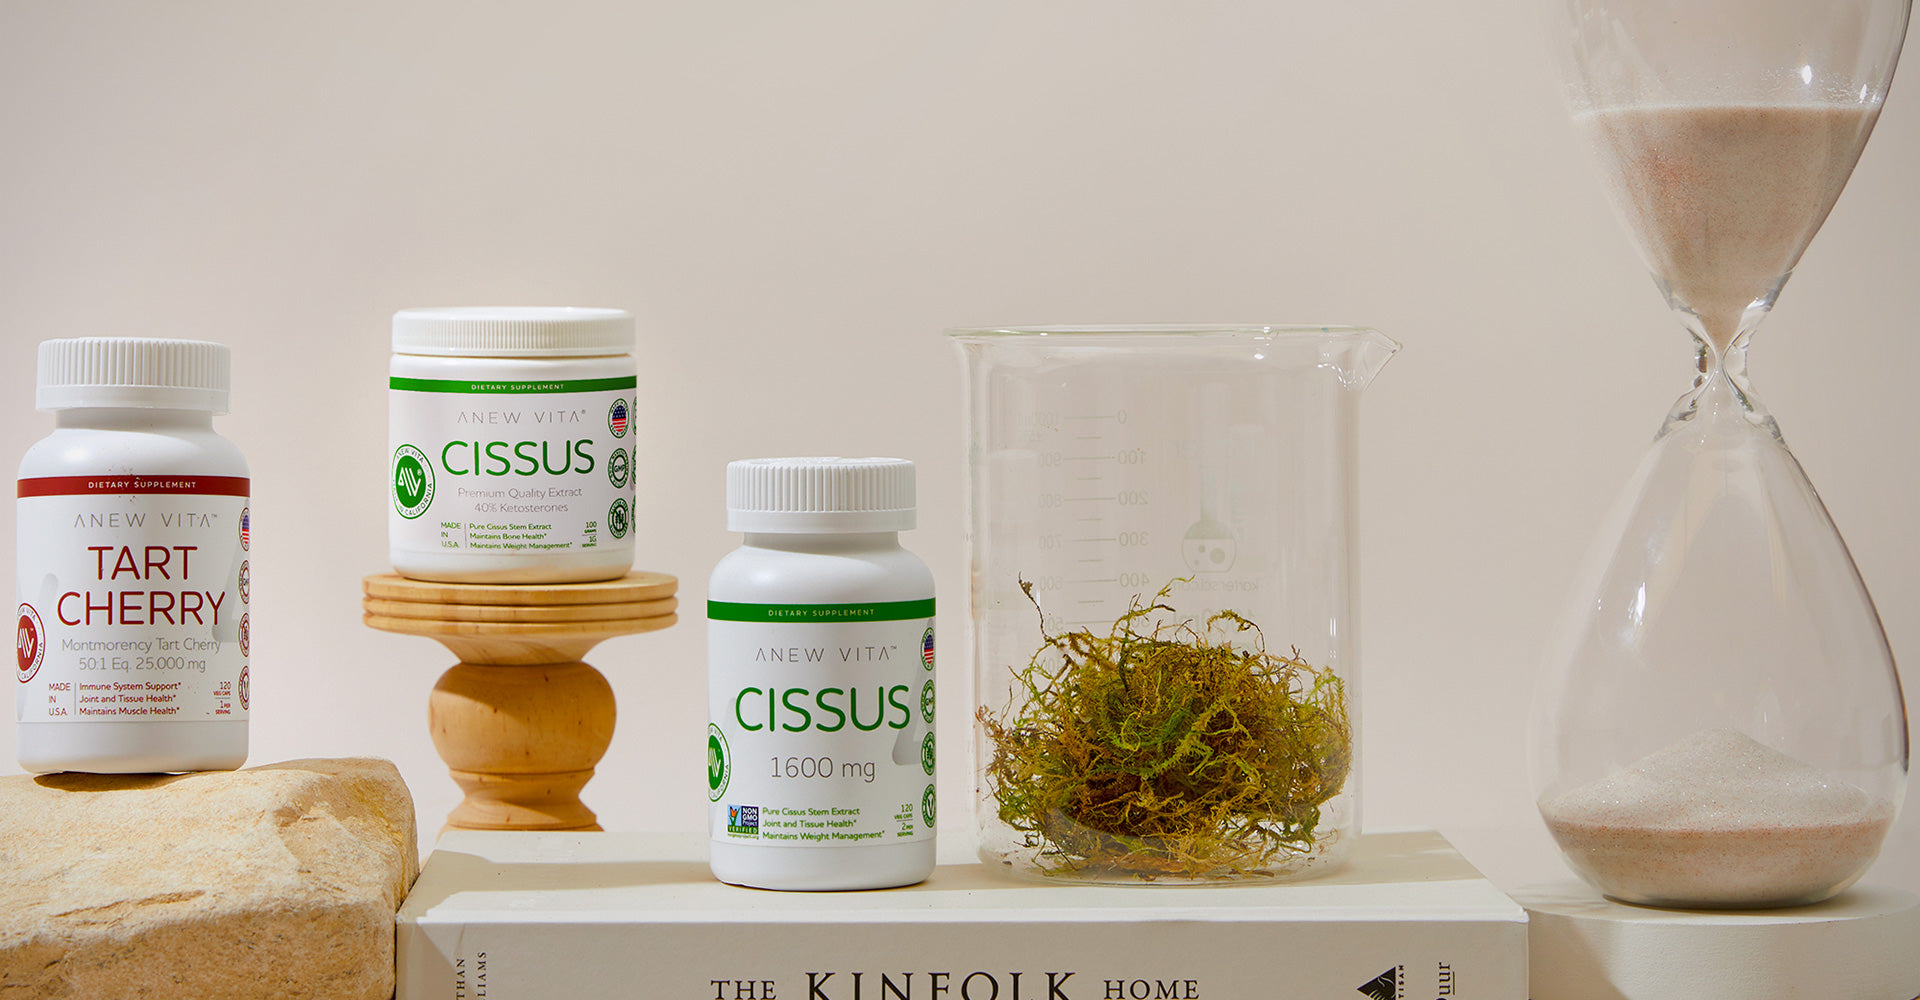 4 Benefits of Cissus: Supporting Your Bone Health and Wellbeing